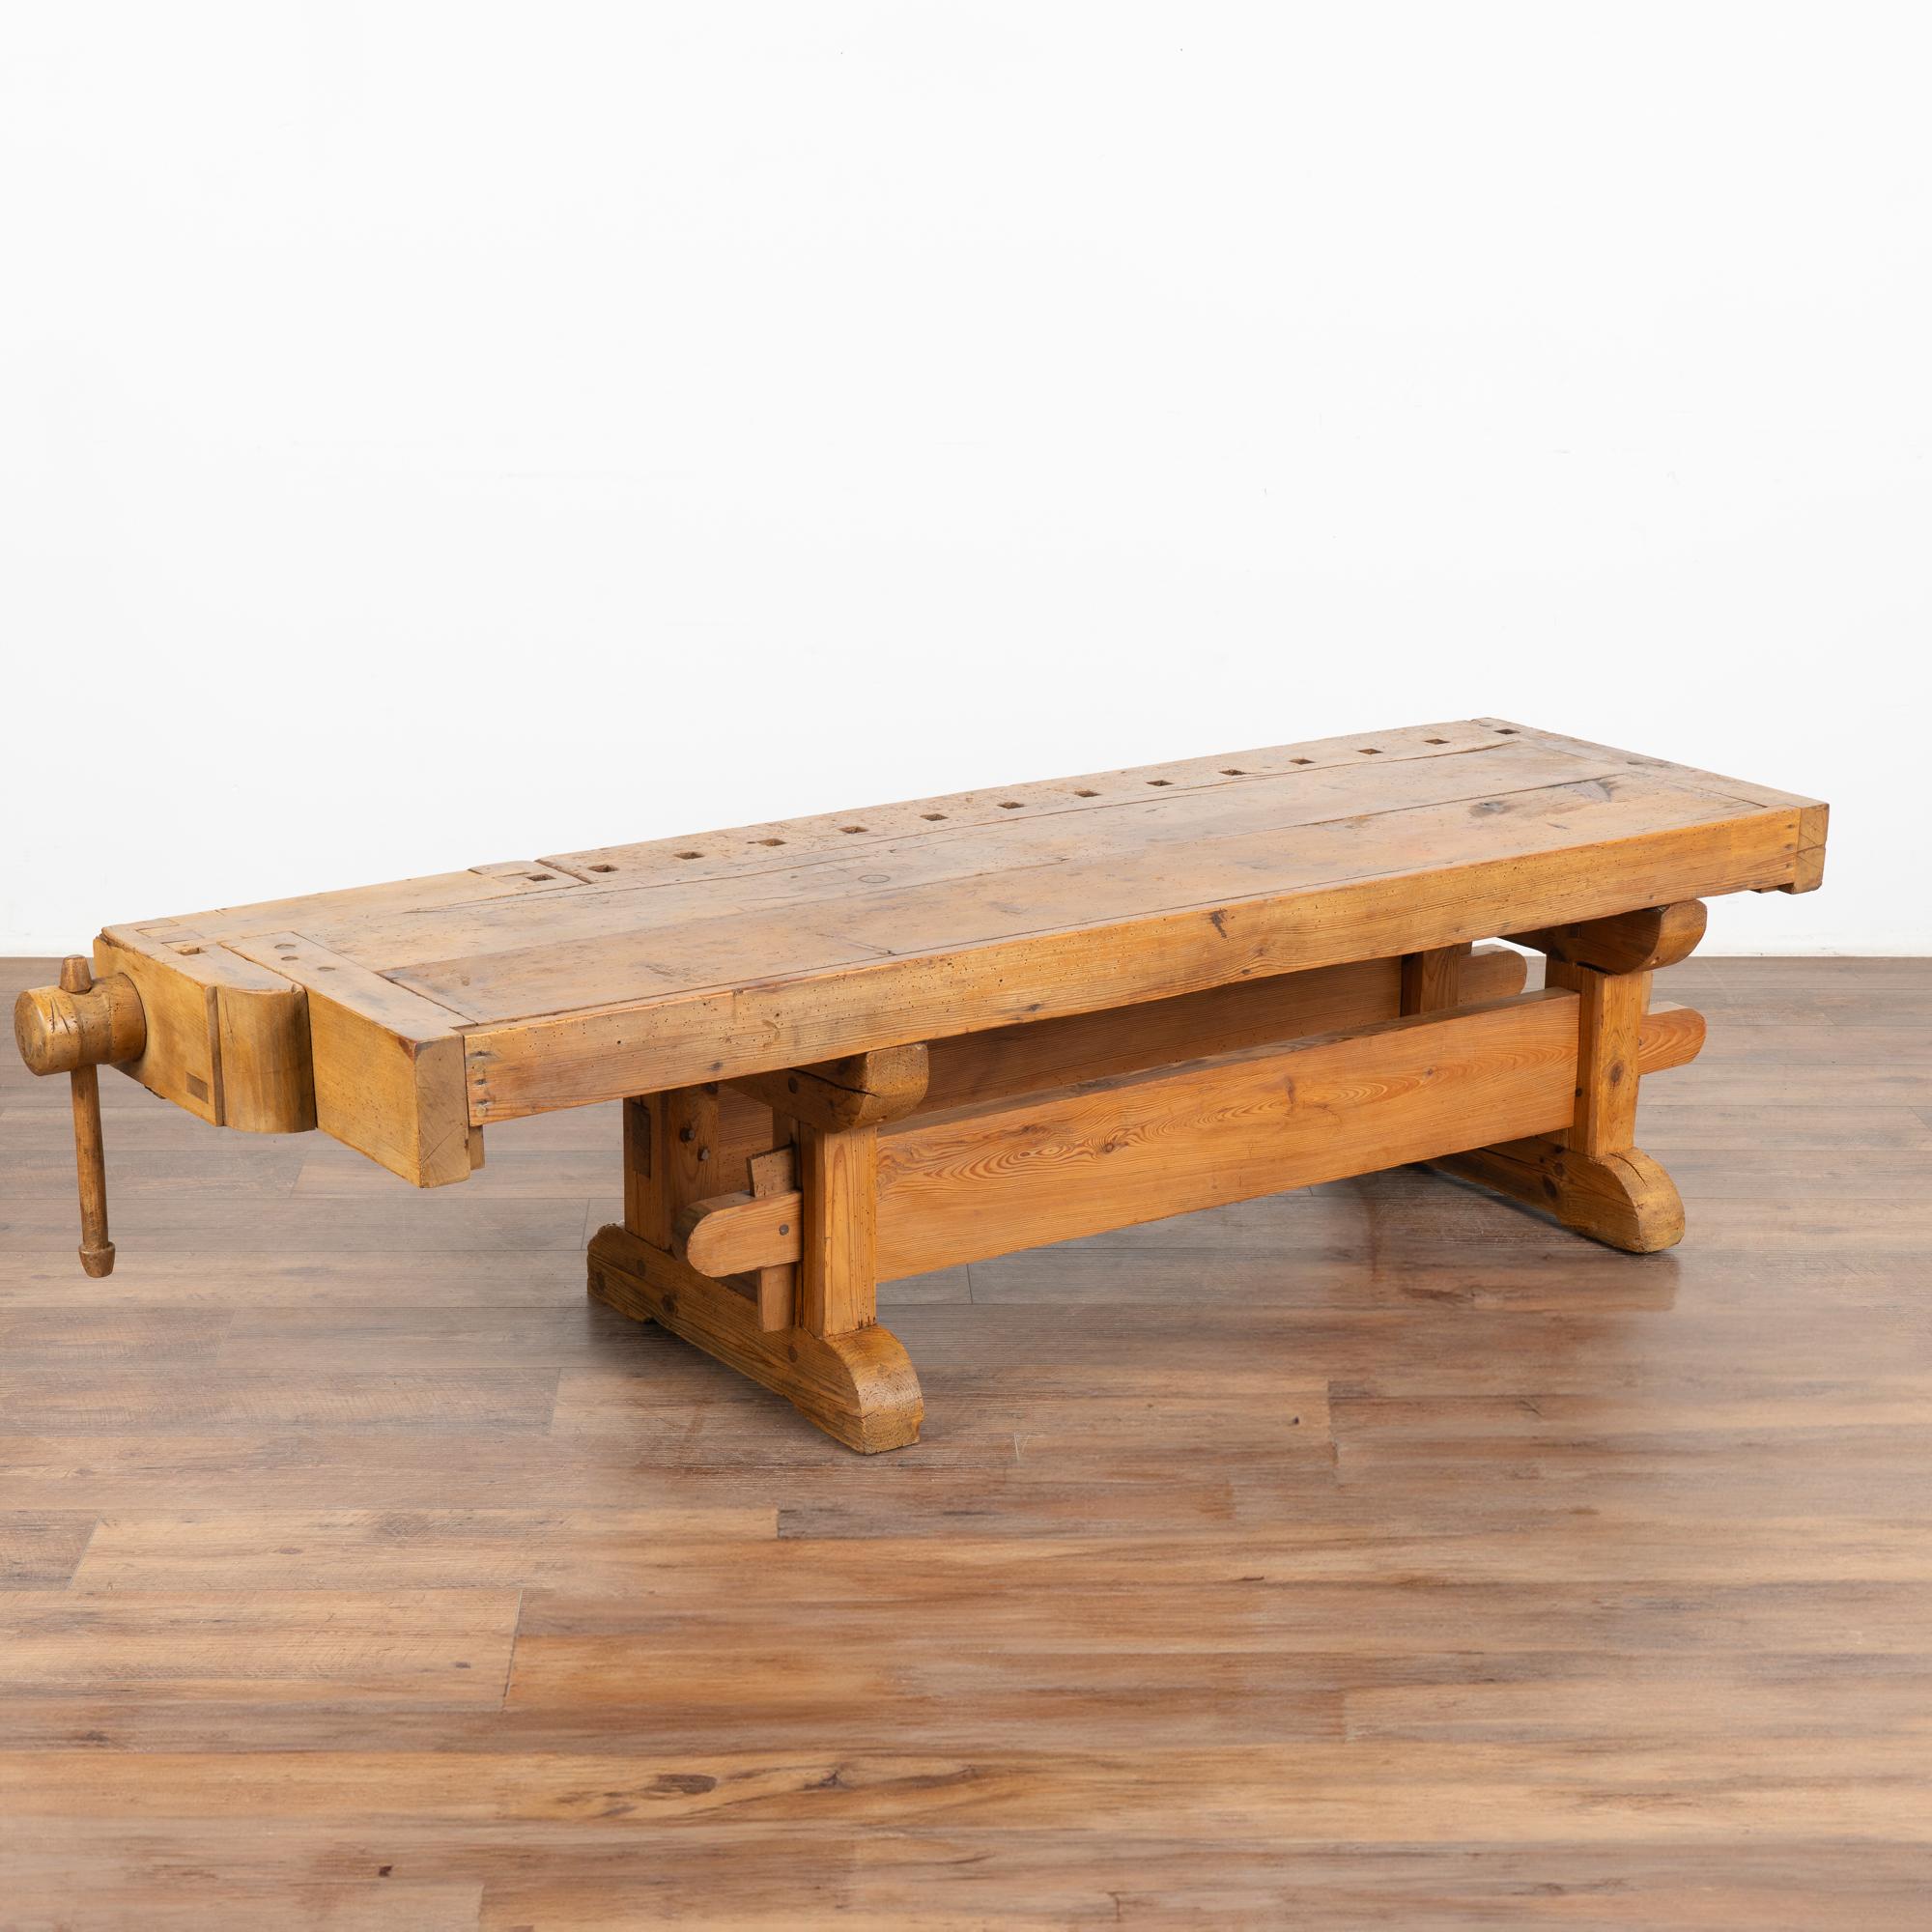 This rustic coffee table is a rare find. It was formed from a large, old carpenter's workbench and scaled down to coffee table height. 
It is the years of constant use revealed in every ding, gouge, cracks, old dried worm hole and stain that enrich